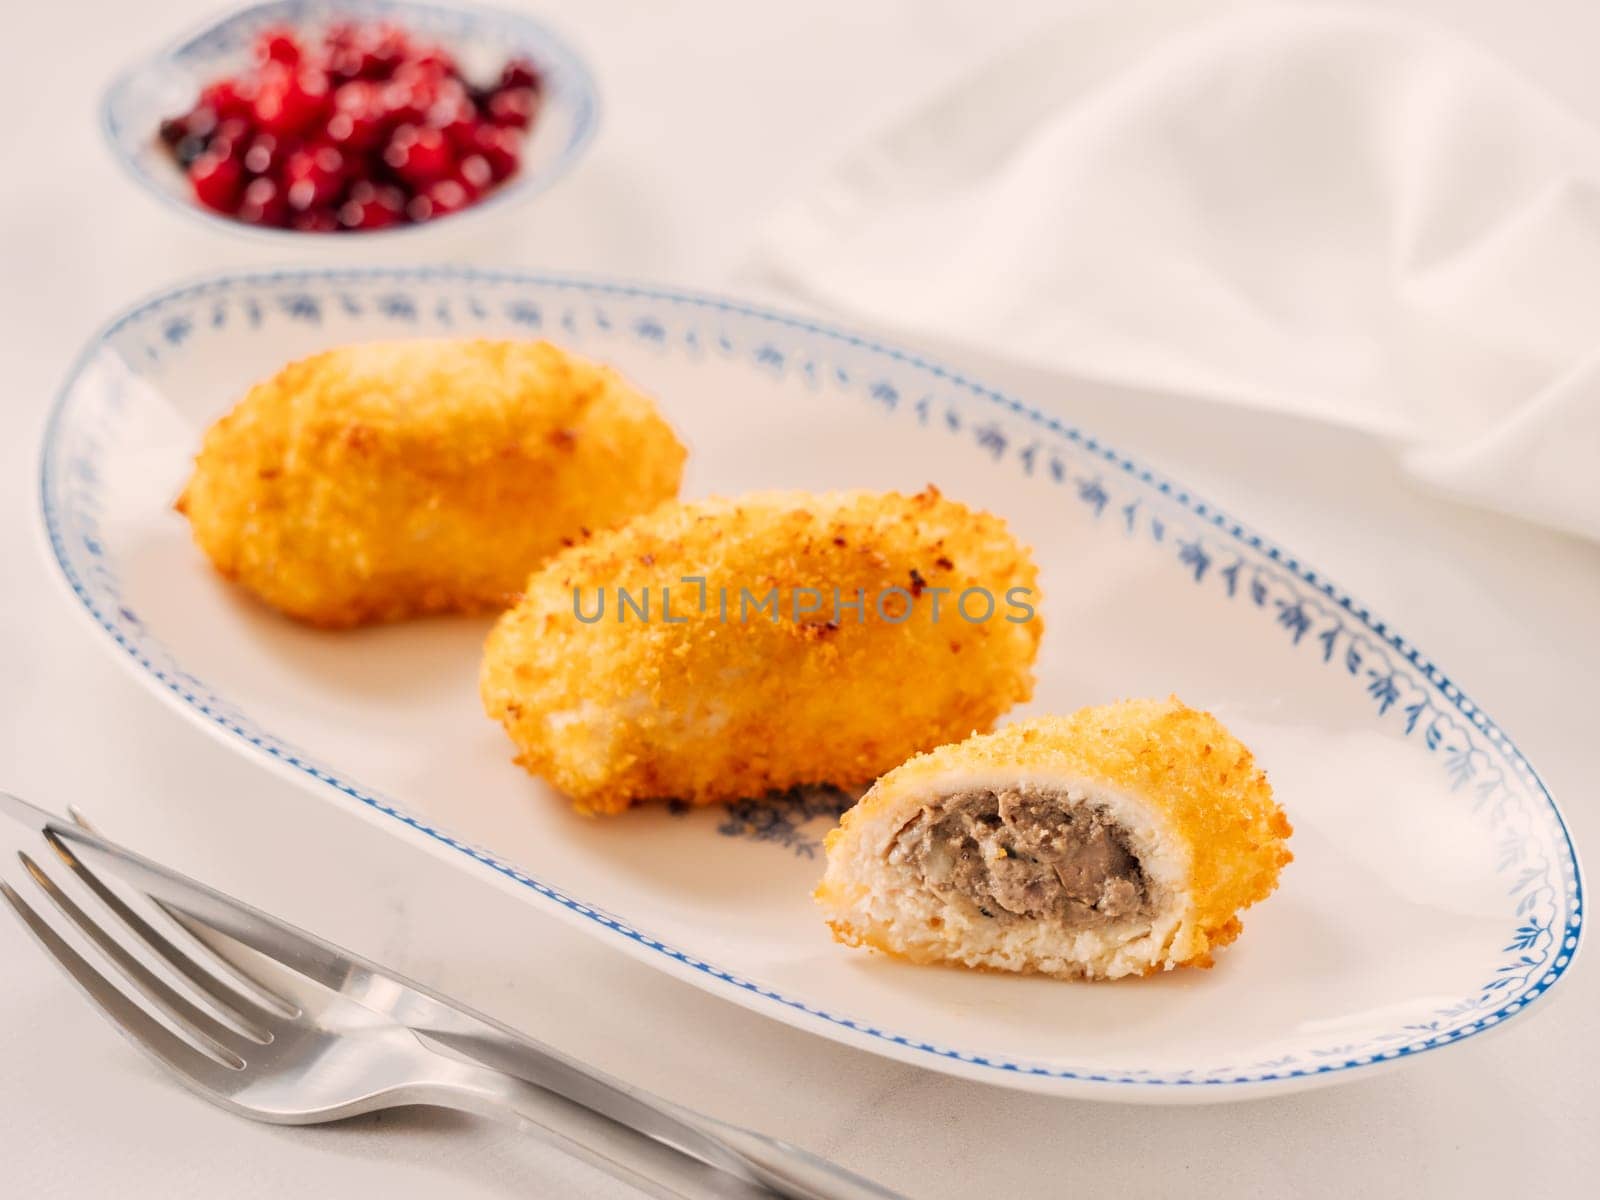 Crispy breaded cutlet. Three perfect crunchy cutlet on plate. Delicious fried cutlets in bread crumbs made from beef, pork, chicken meat or fish